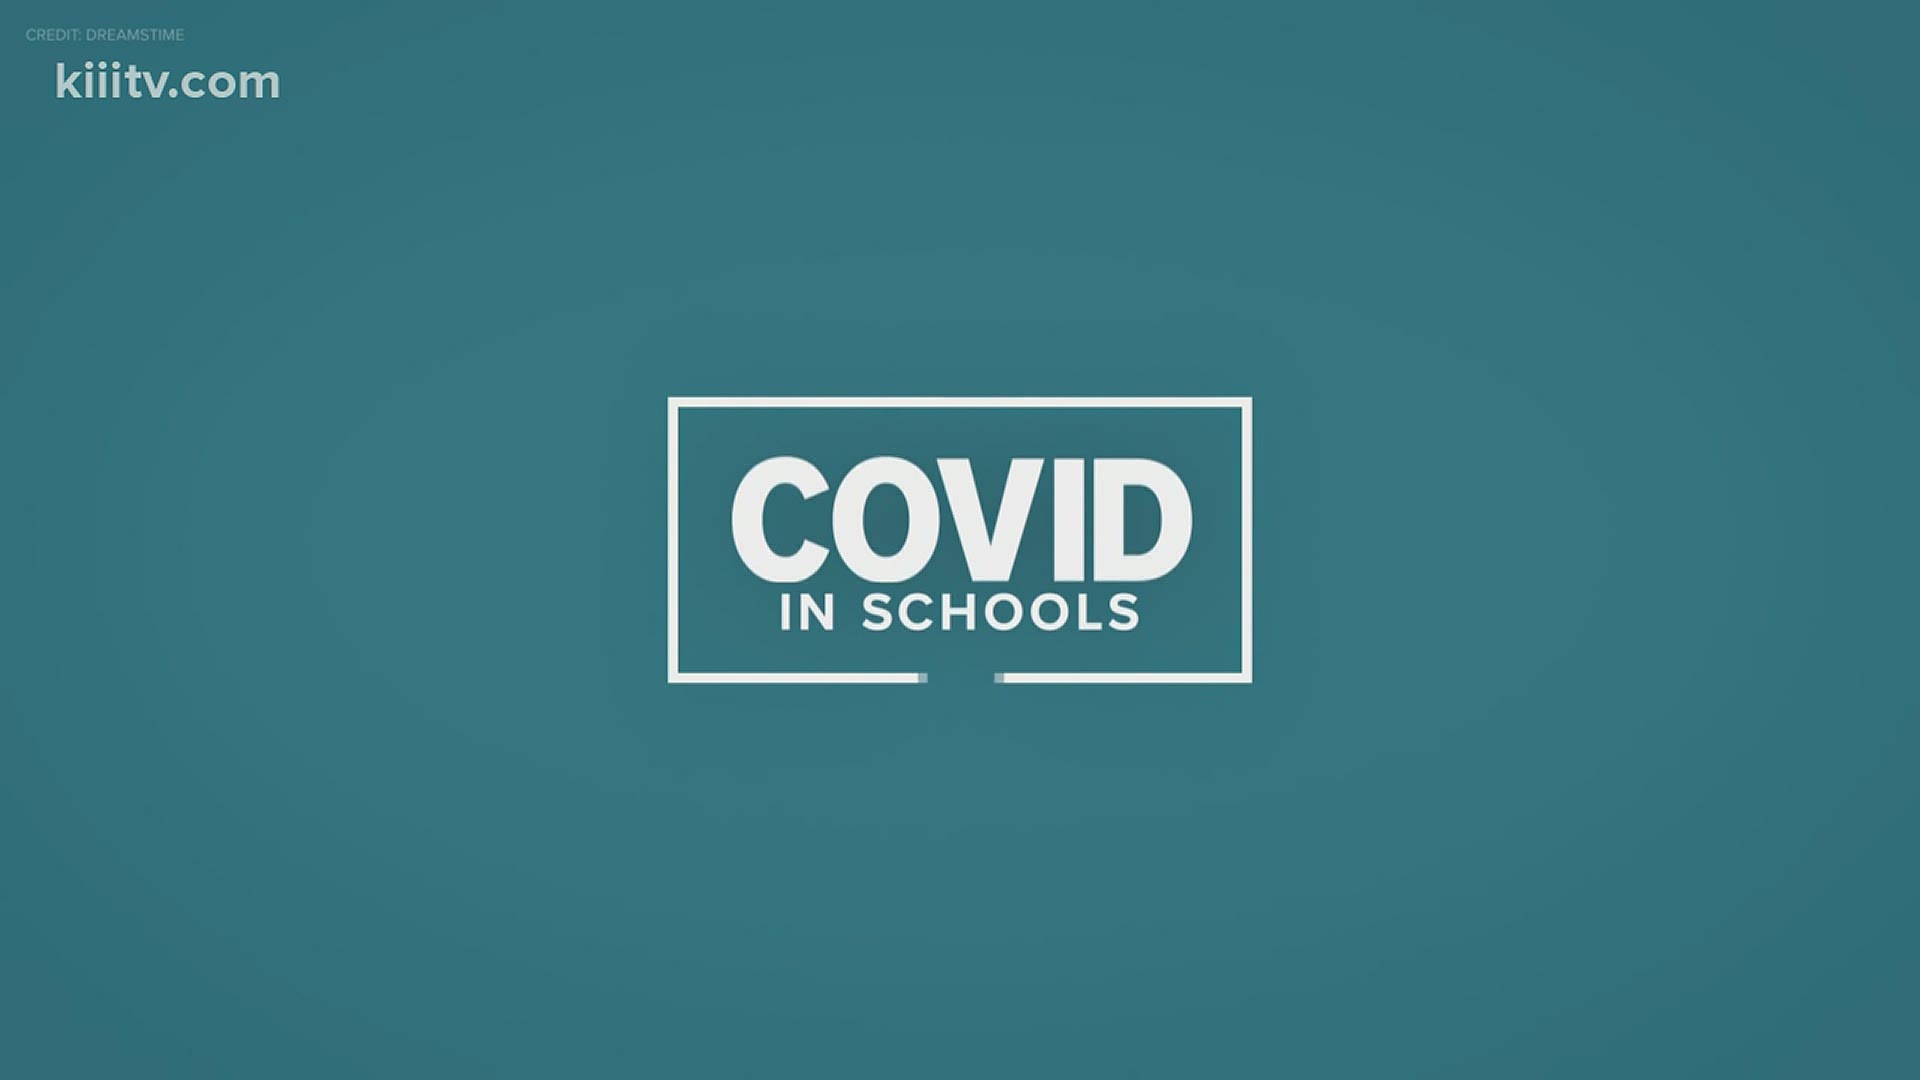 The junior high had just reopened campus on Jan. 12 after closing on Jan. 6 because of positive COVID results.